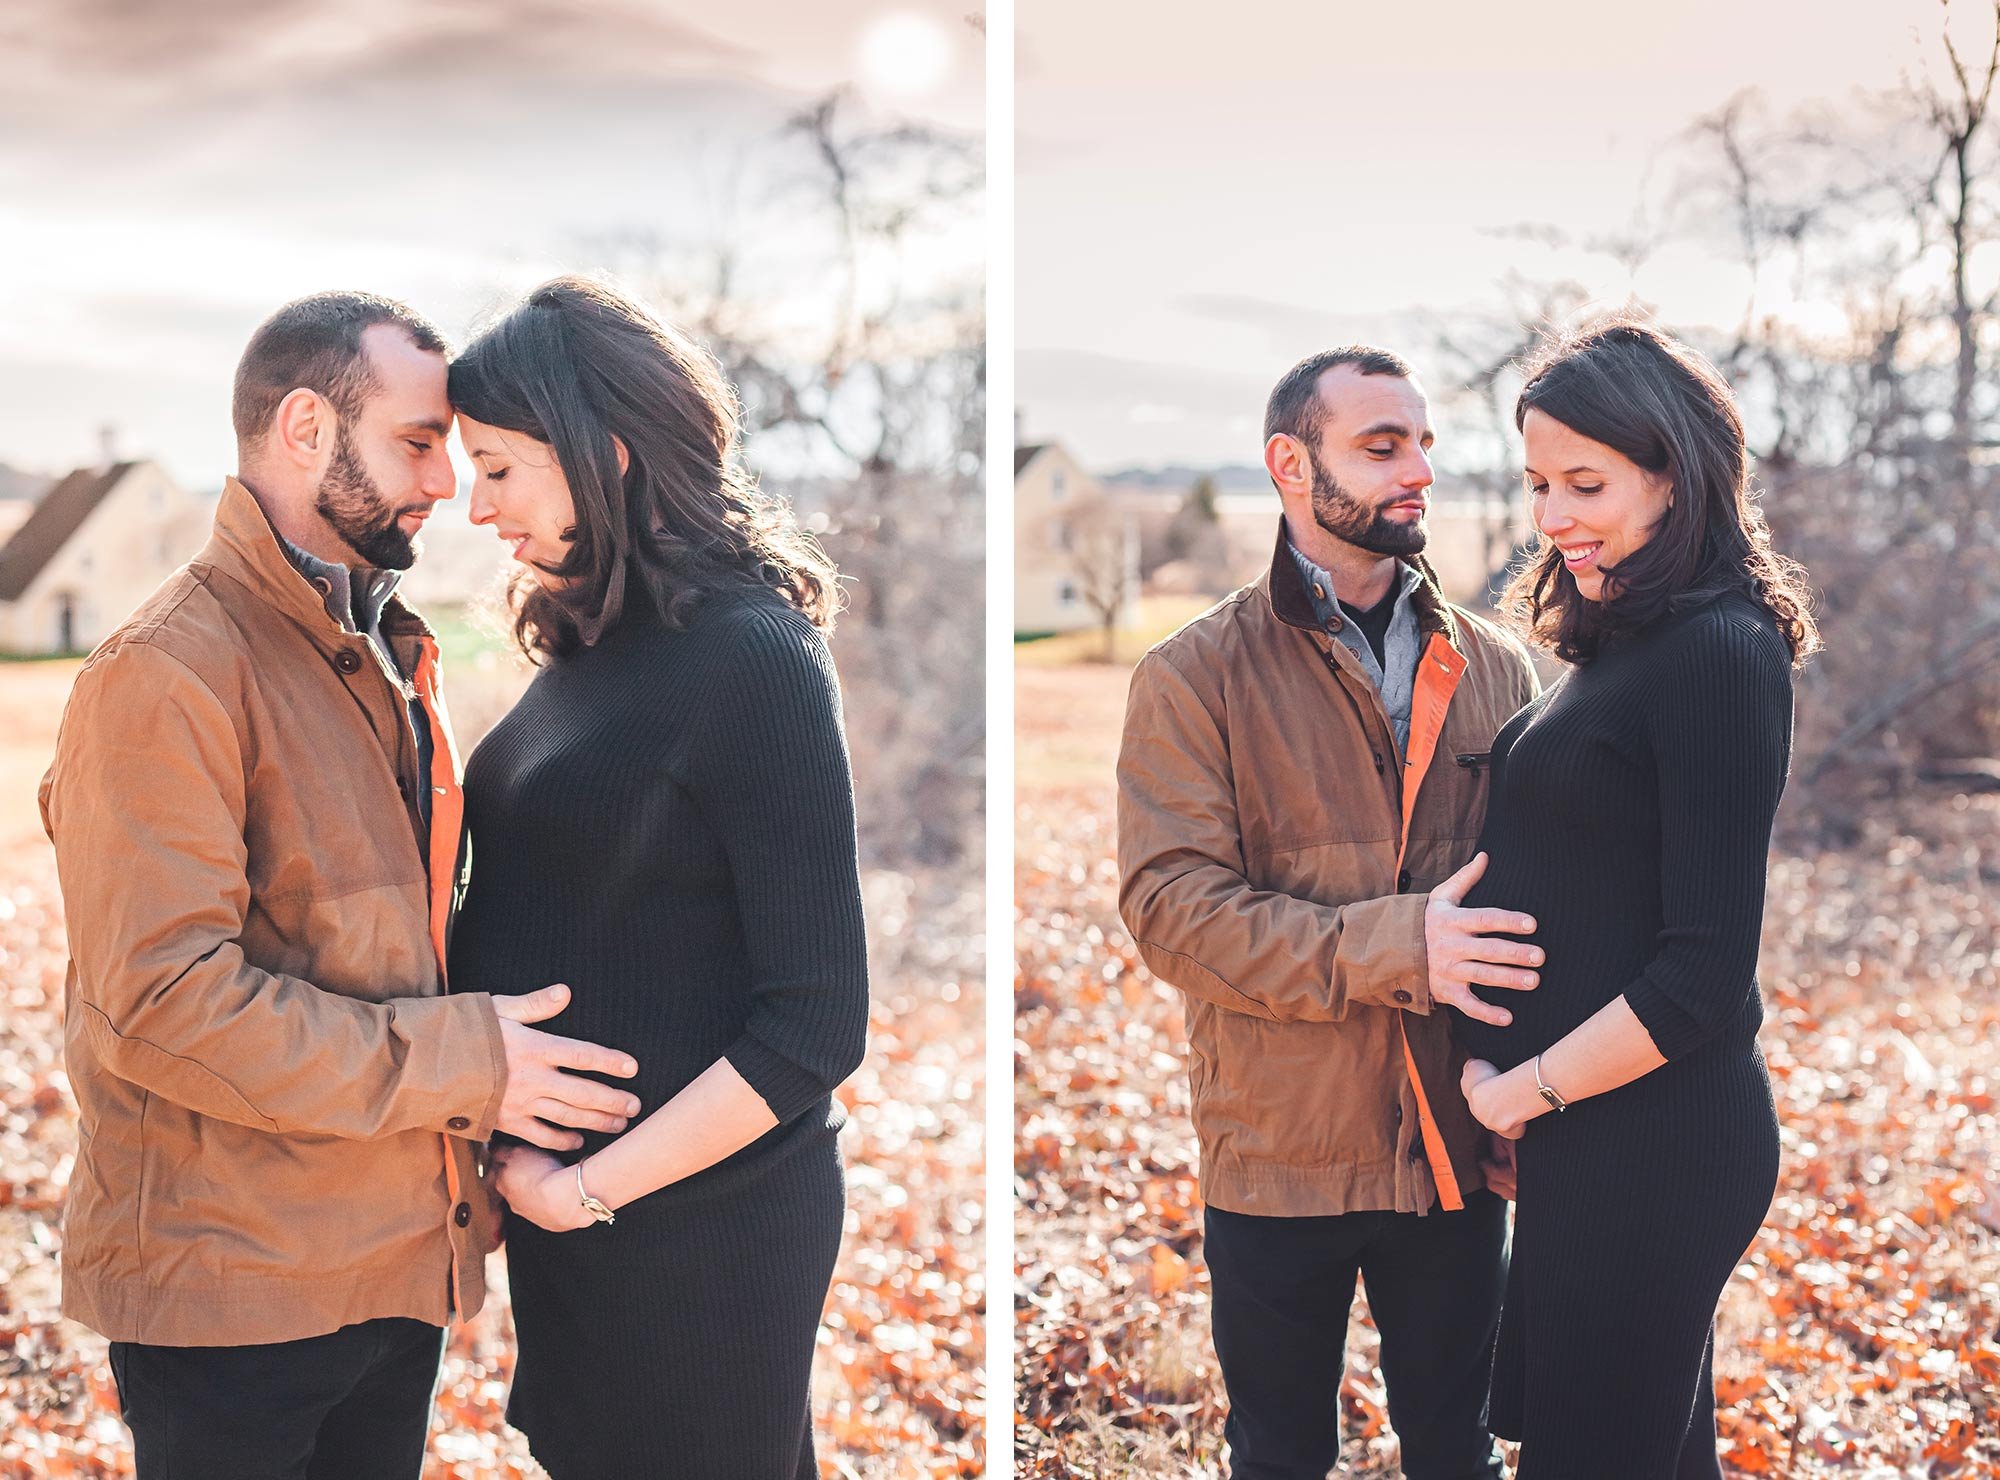 Ipswich Strawberry Hill Maternity Portrait Session - Stephen Grant Photography